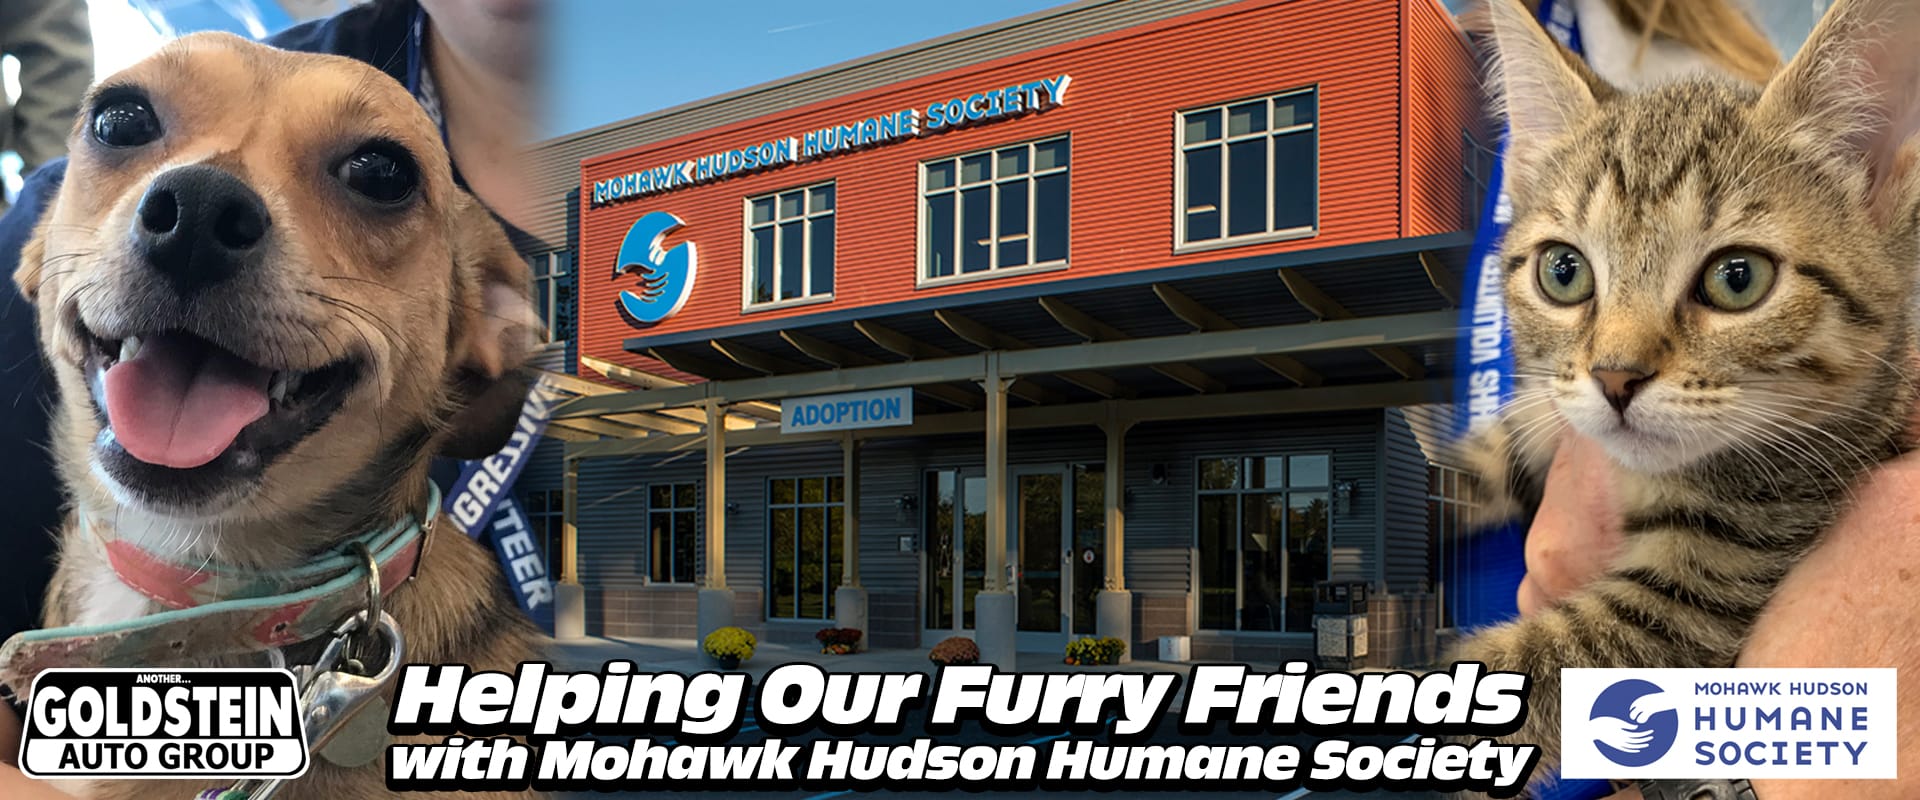 Goldstein Auto Group and Mohawk Hudson Humane Society Donations information